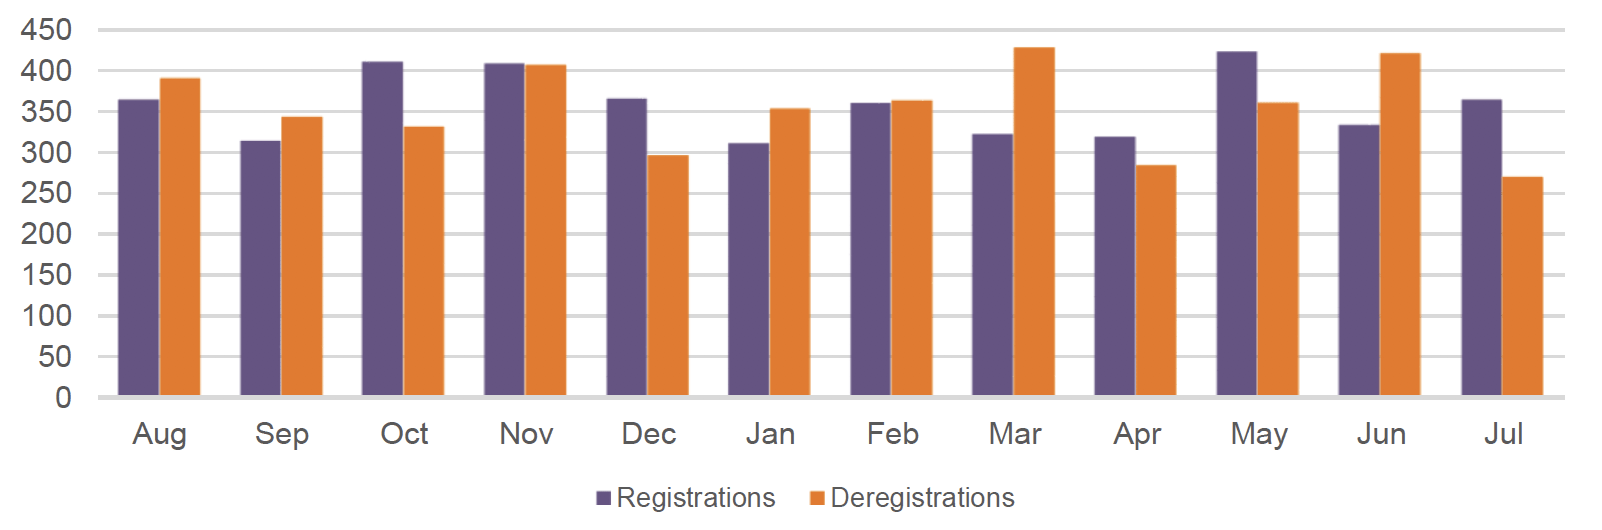 This shows the number of child protection registrations and deregistrations by month in 2018-19